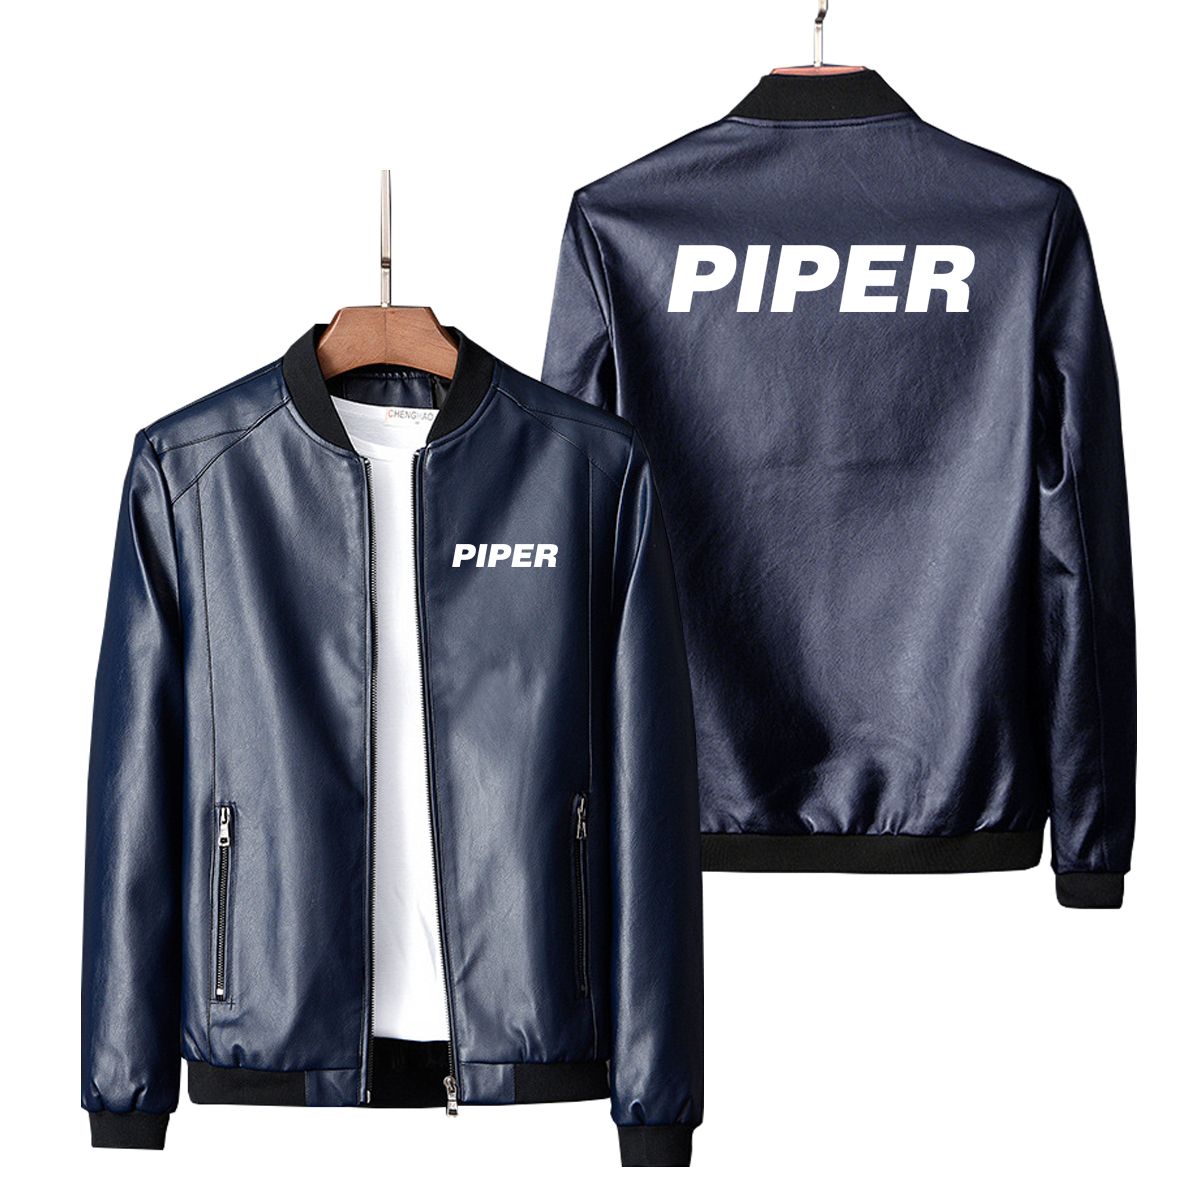 Piper & Text Designed PU Leather Jackets